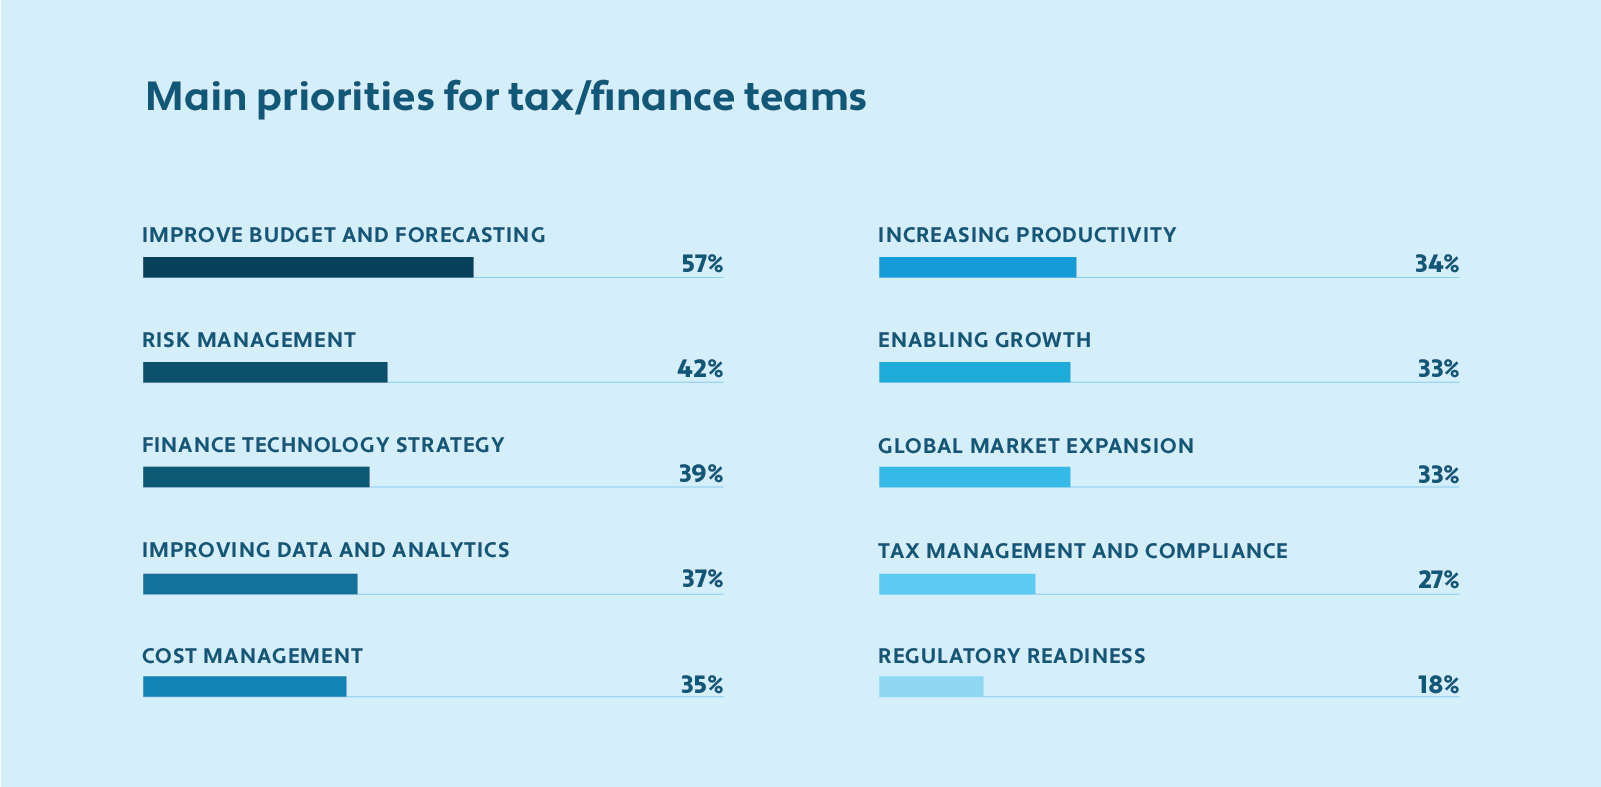 Chart showing the top ten priorities for tax and finance teams based on survey responses.